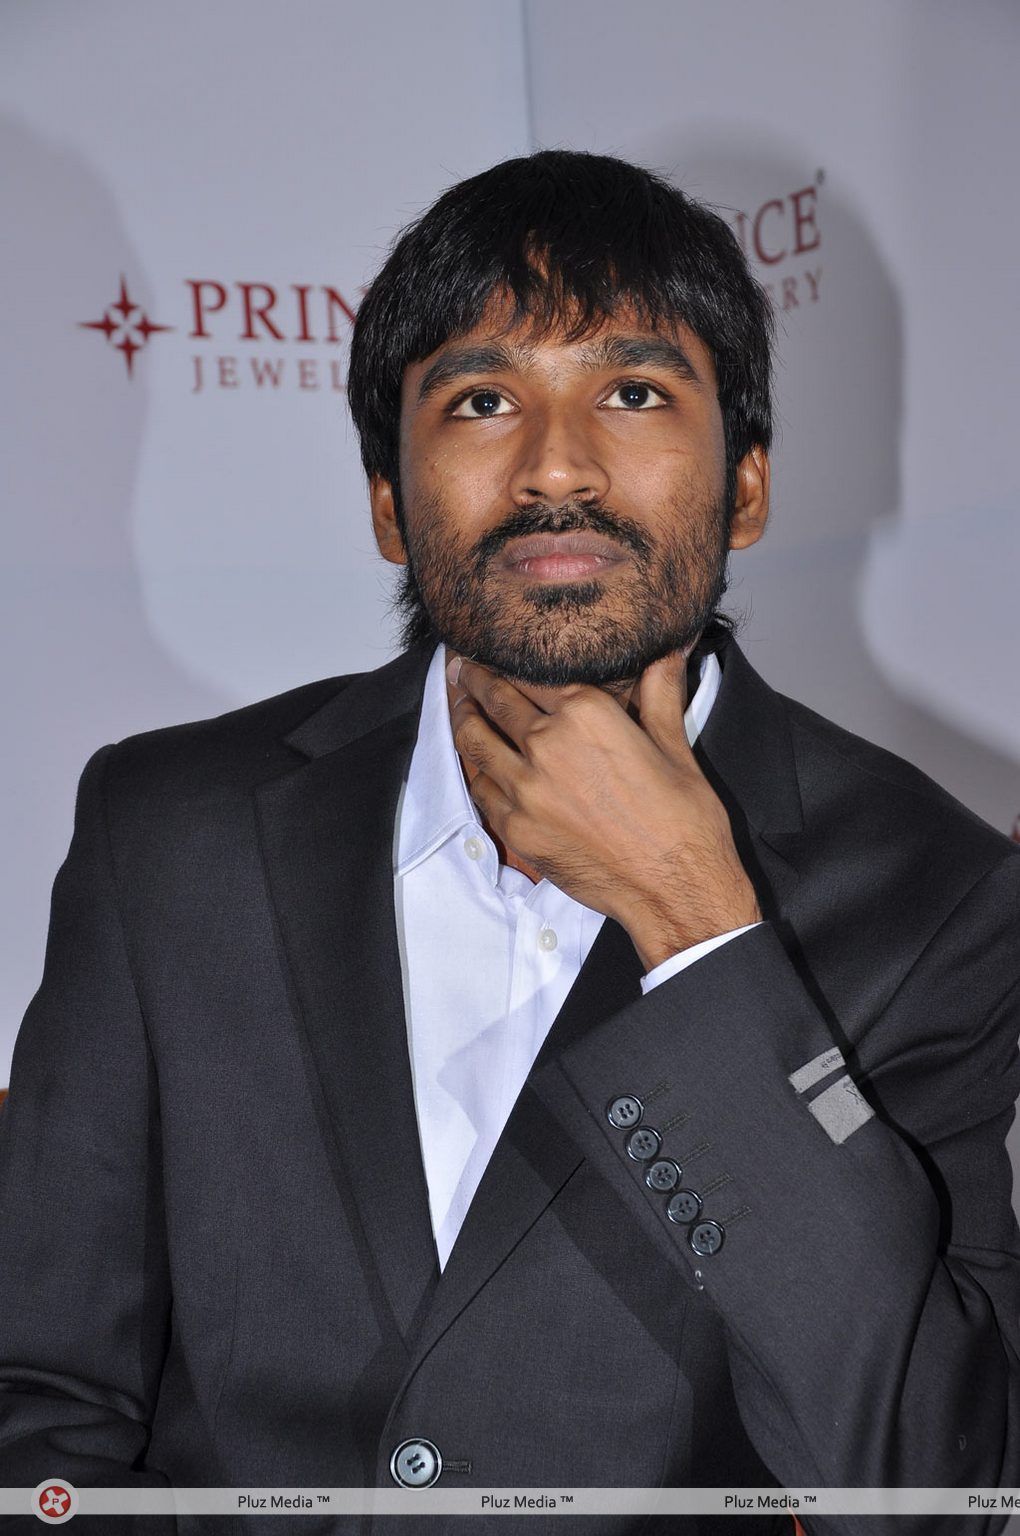 Dhanush - Aishwarya and Dhanush unveil Prince Jewellery's Platinum - Pictures | Picture 139460